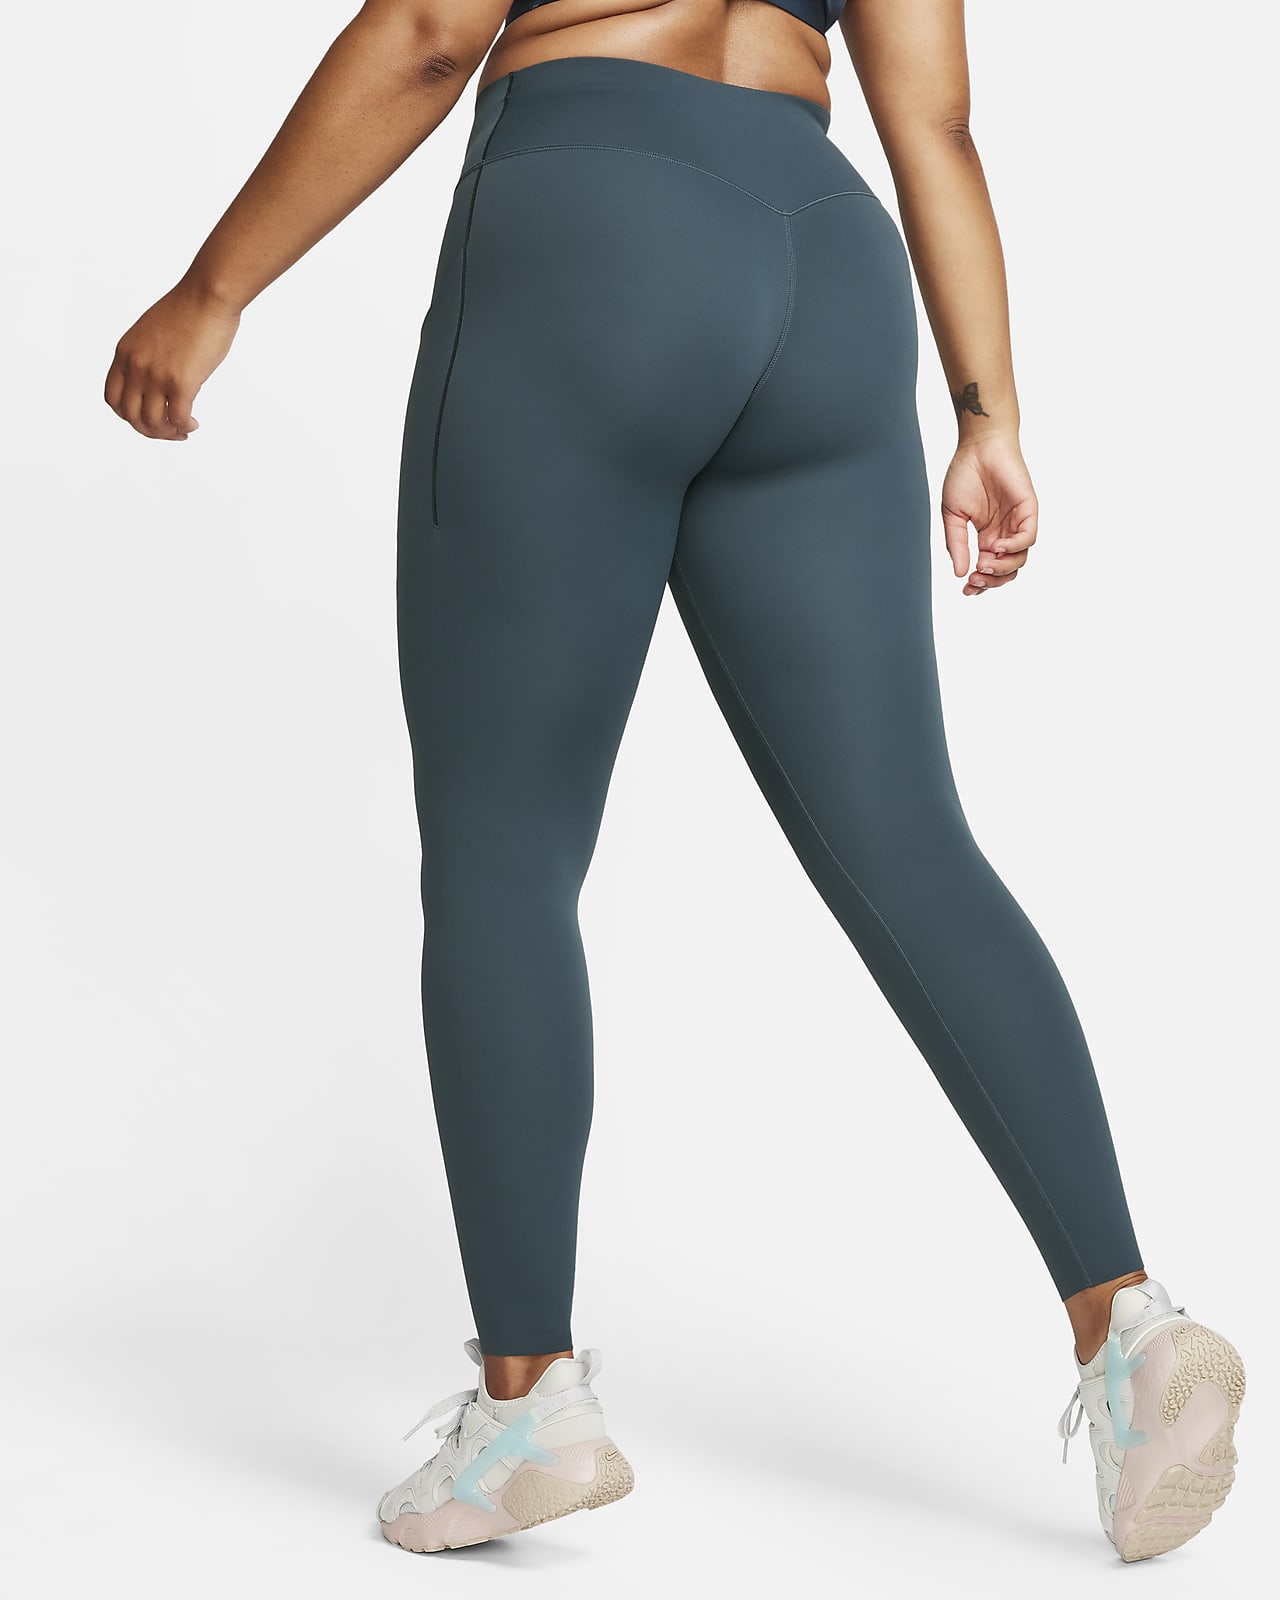 LULULEMON SIZE 4 Ladies EXERCISE – One More Time Family